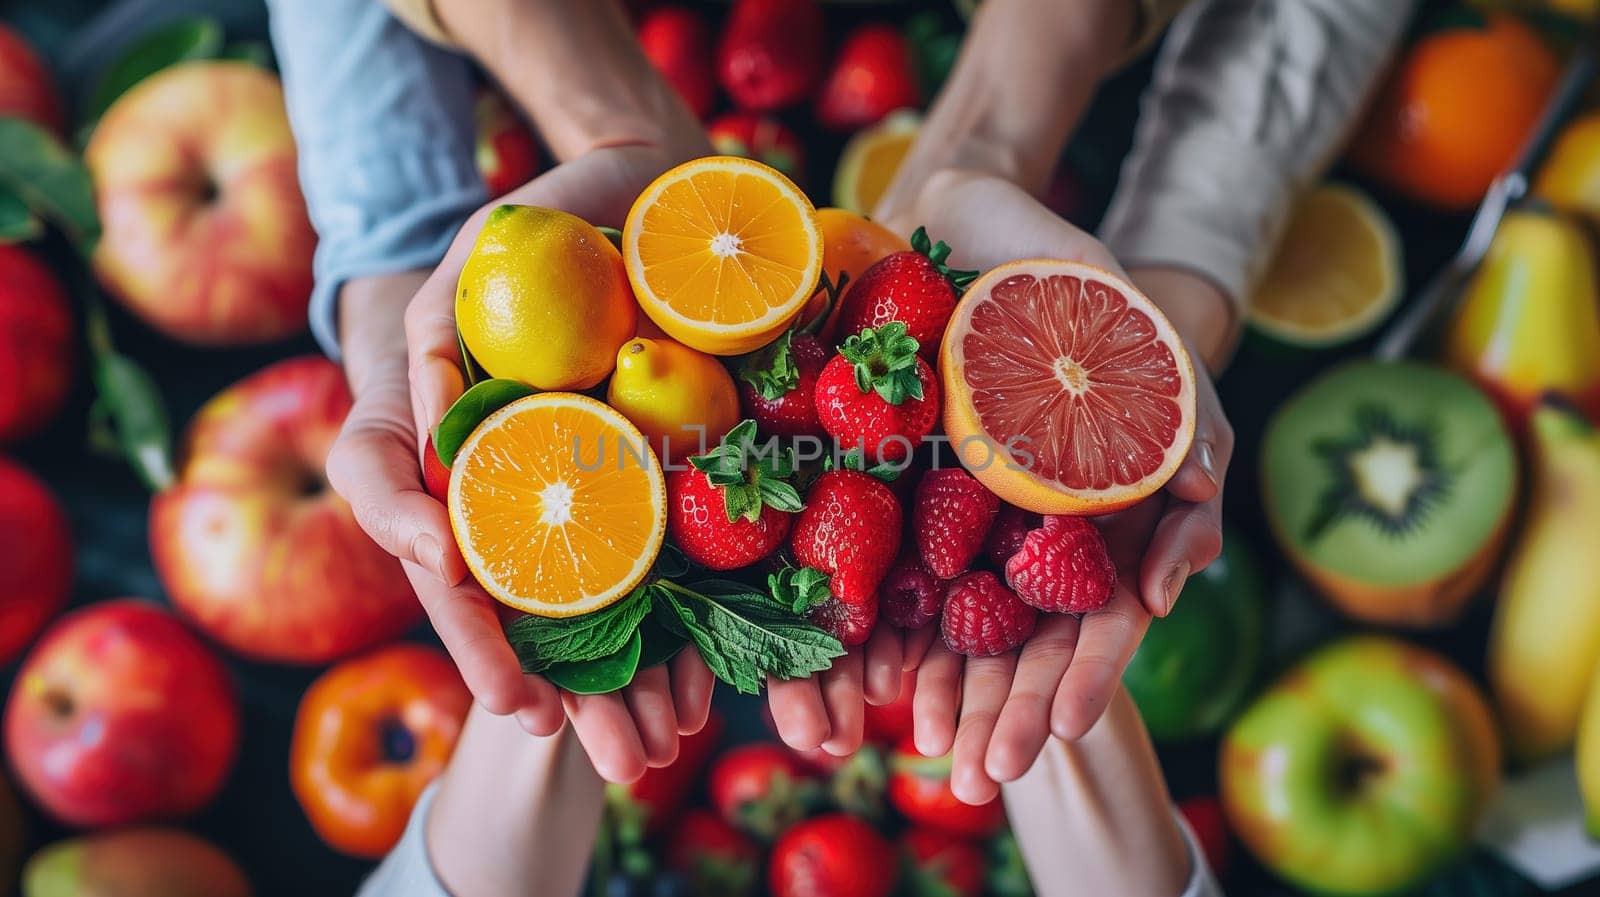 A diverse group of individuals holding various types of fruit in their hands. They are standing together, showcasing the colorful and healthy produce they are holding.